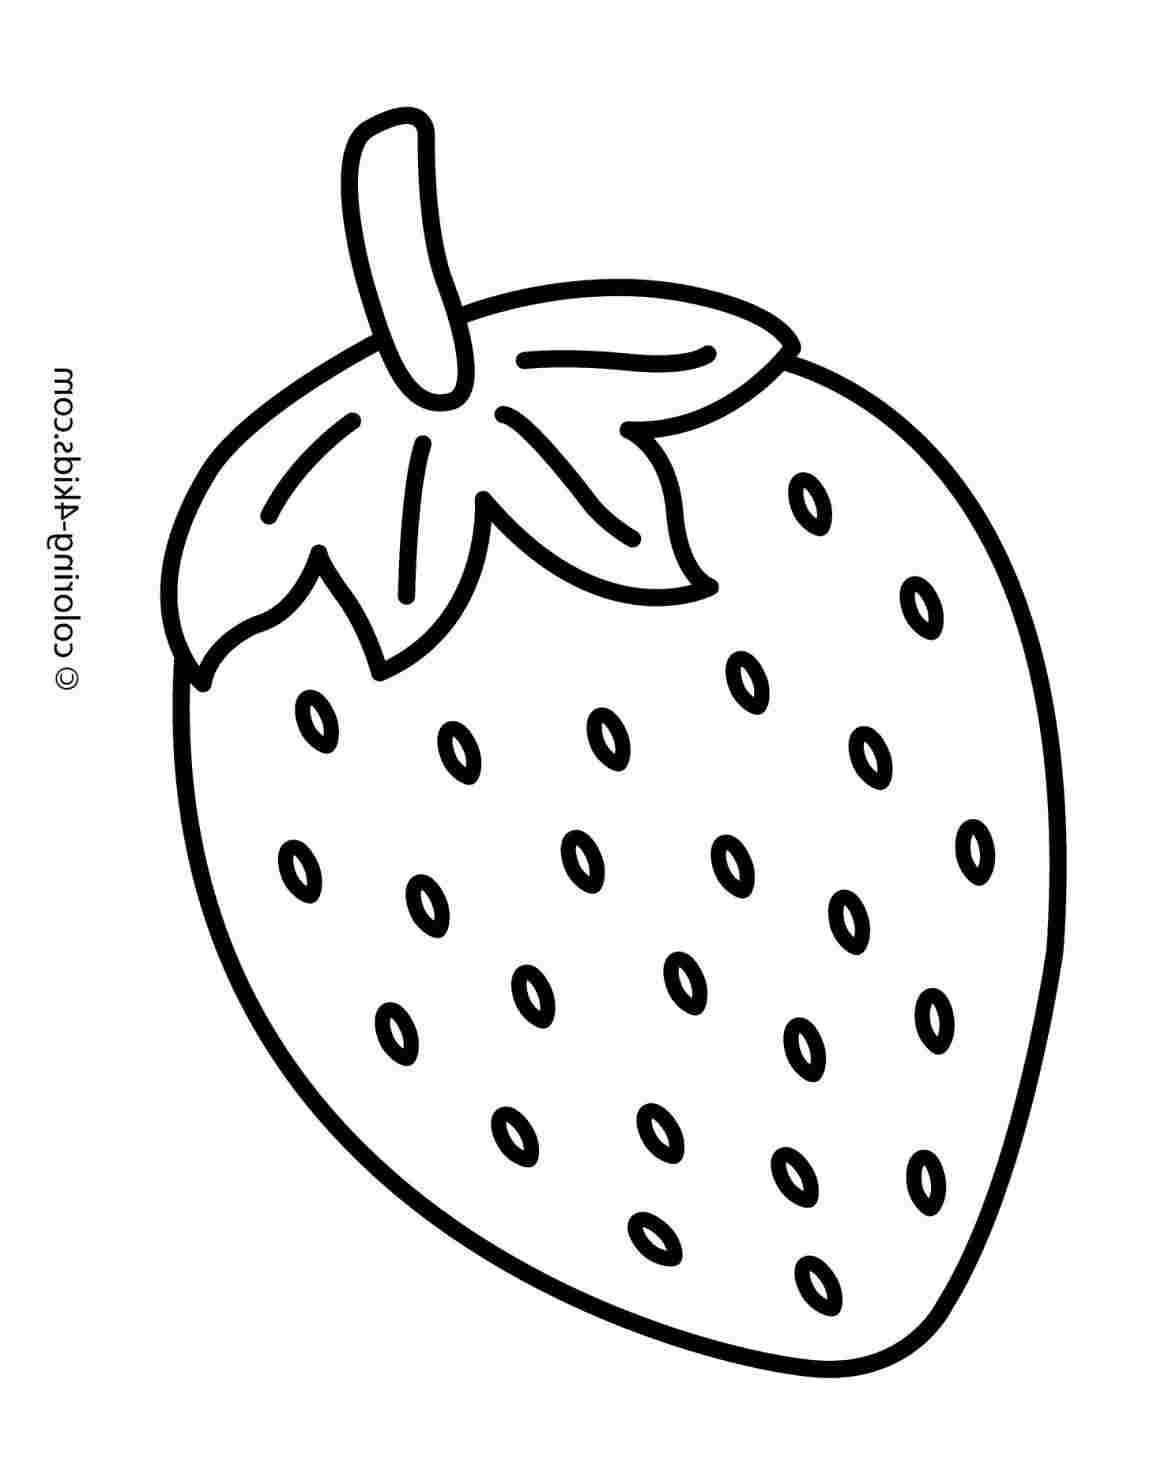 Easy Human Heart Drawing | Free download on ClipArtMag